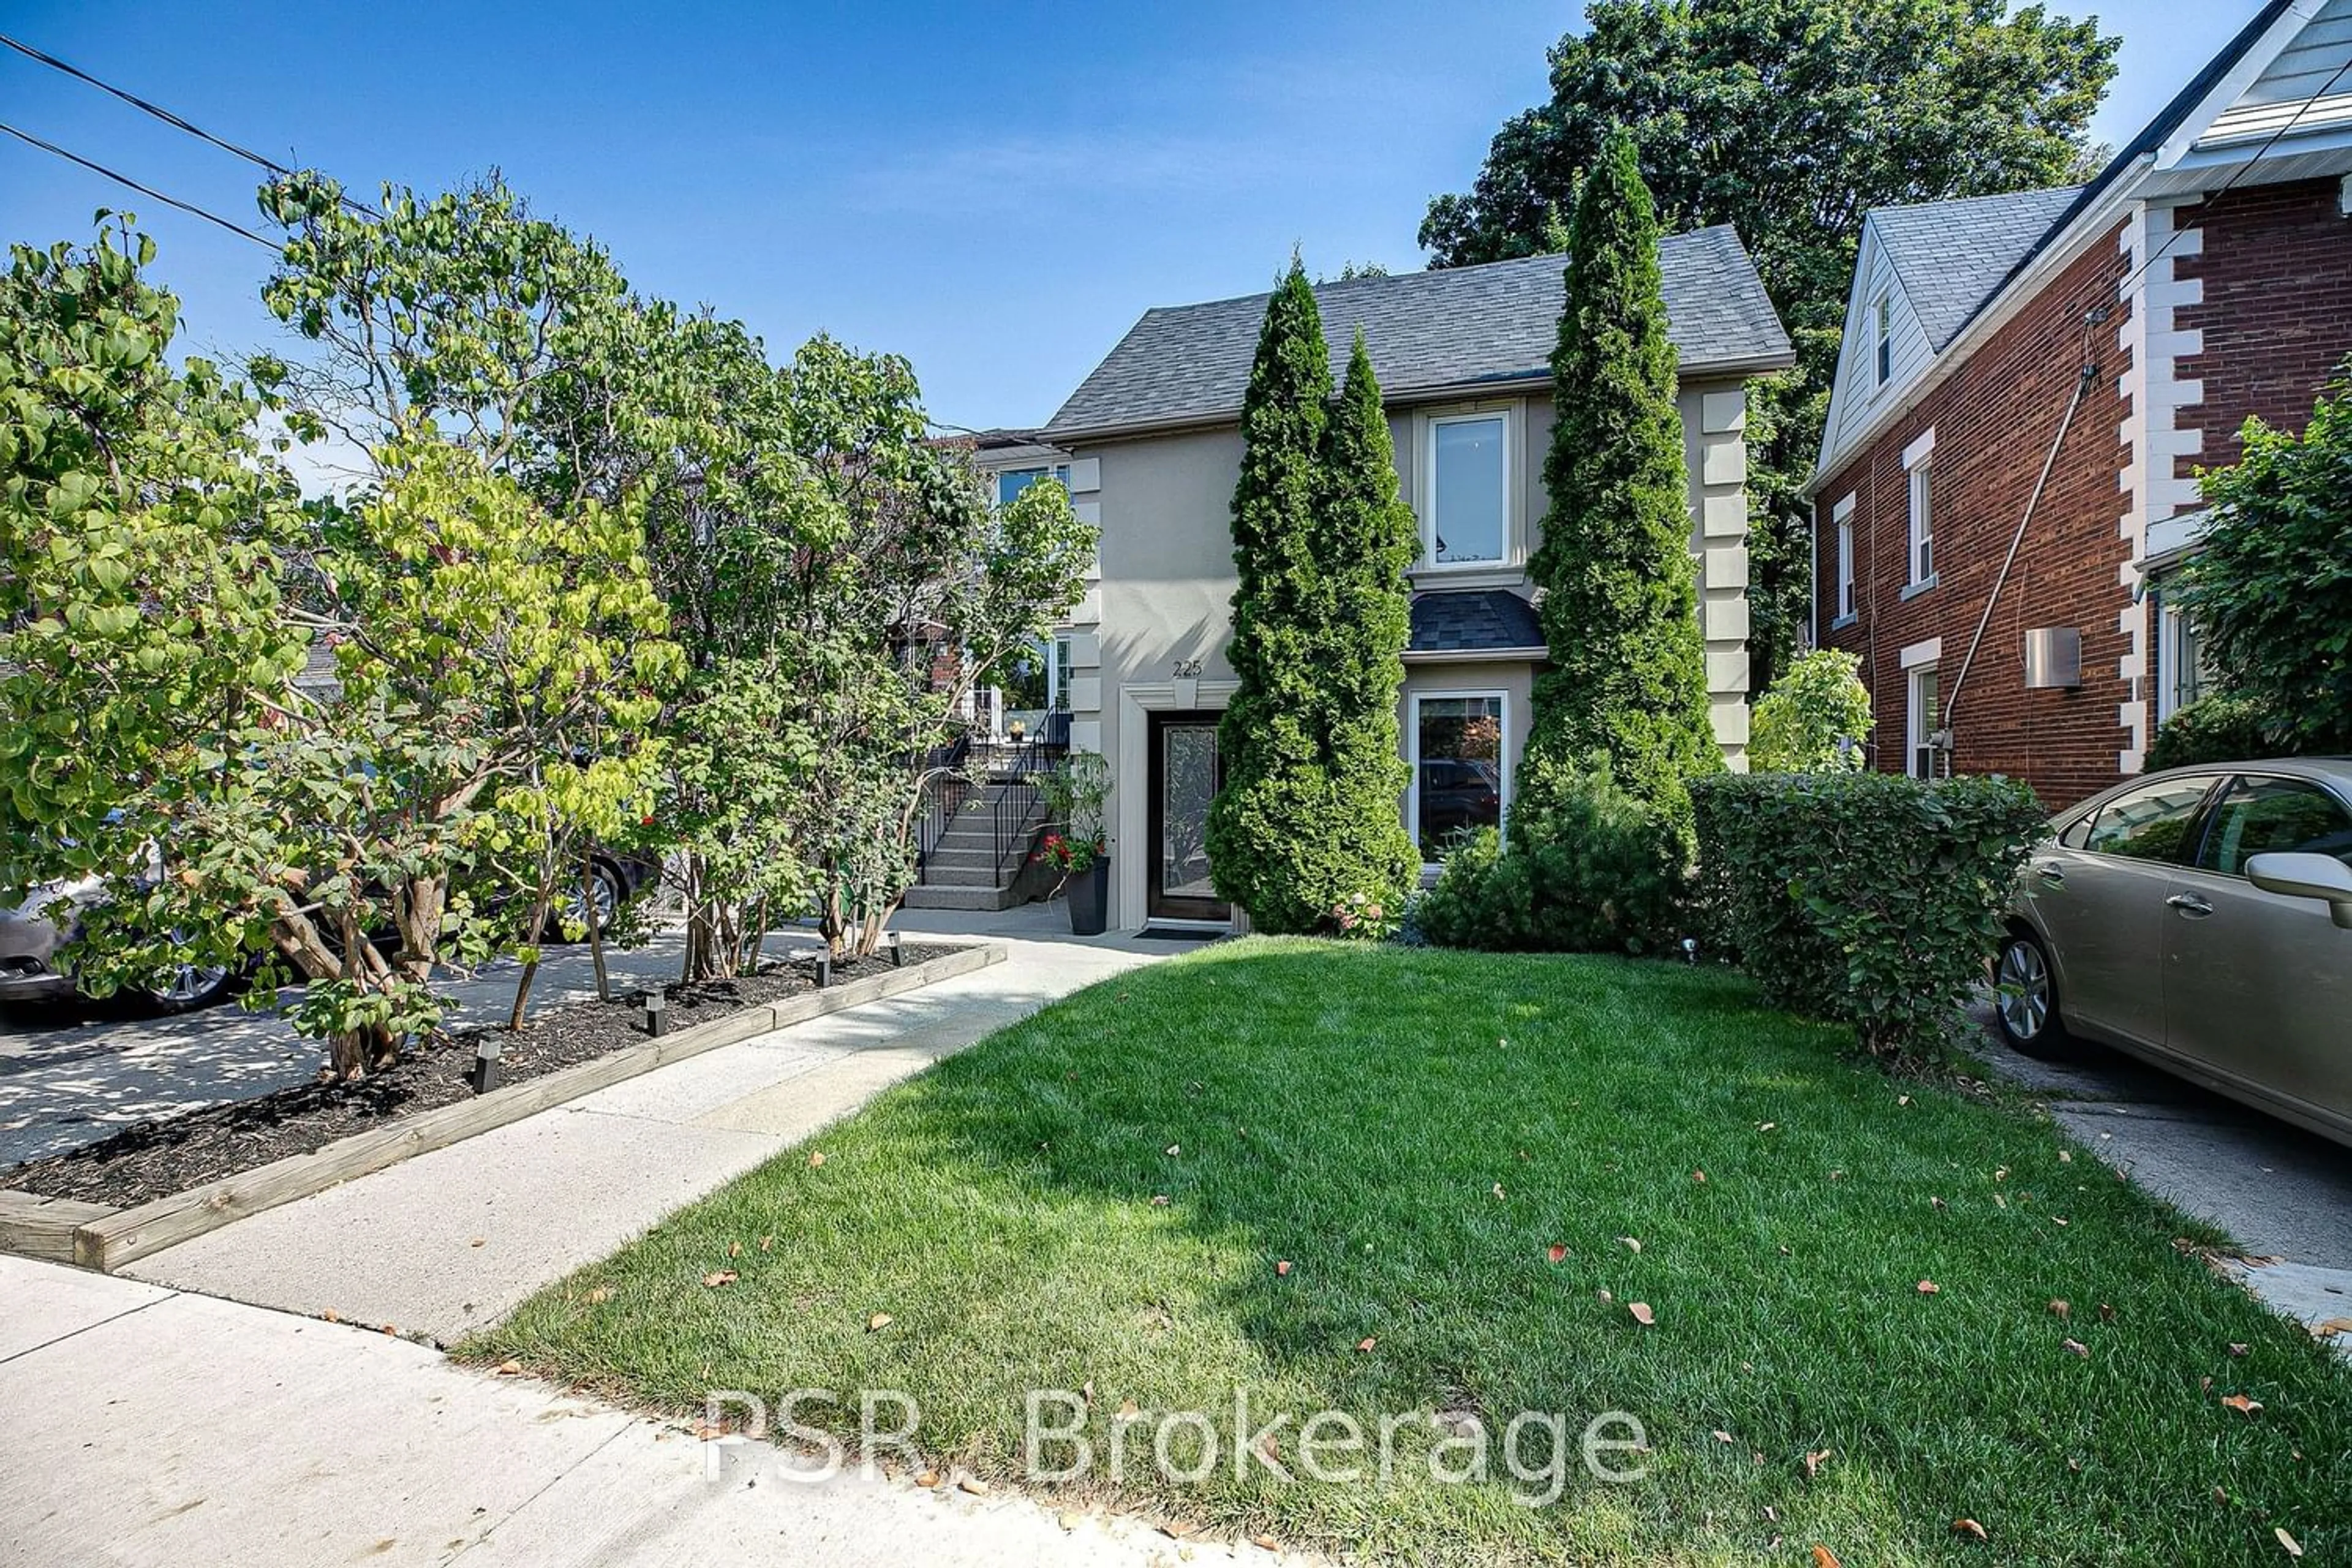 Frontside or backside of a home for 225 Pickering St, Toronto Ontario M4E 3J9